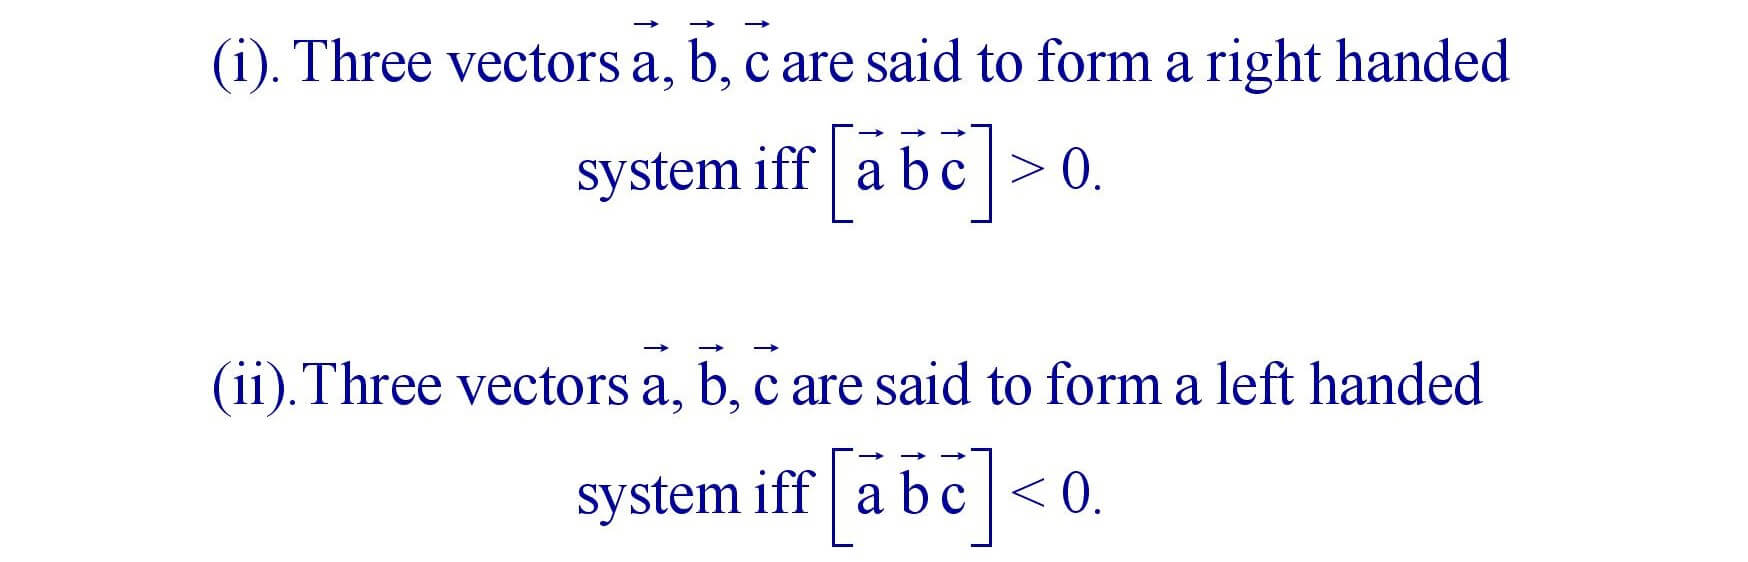 Right - Hand and Left - Handed system of three vectors